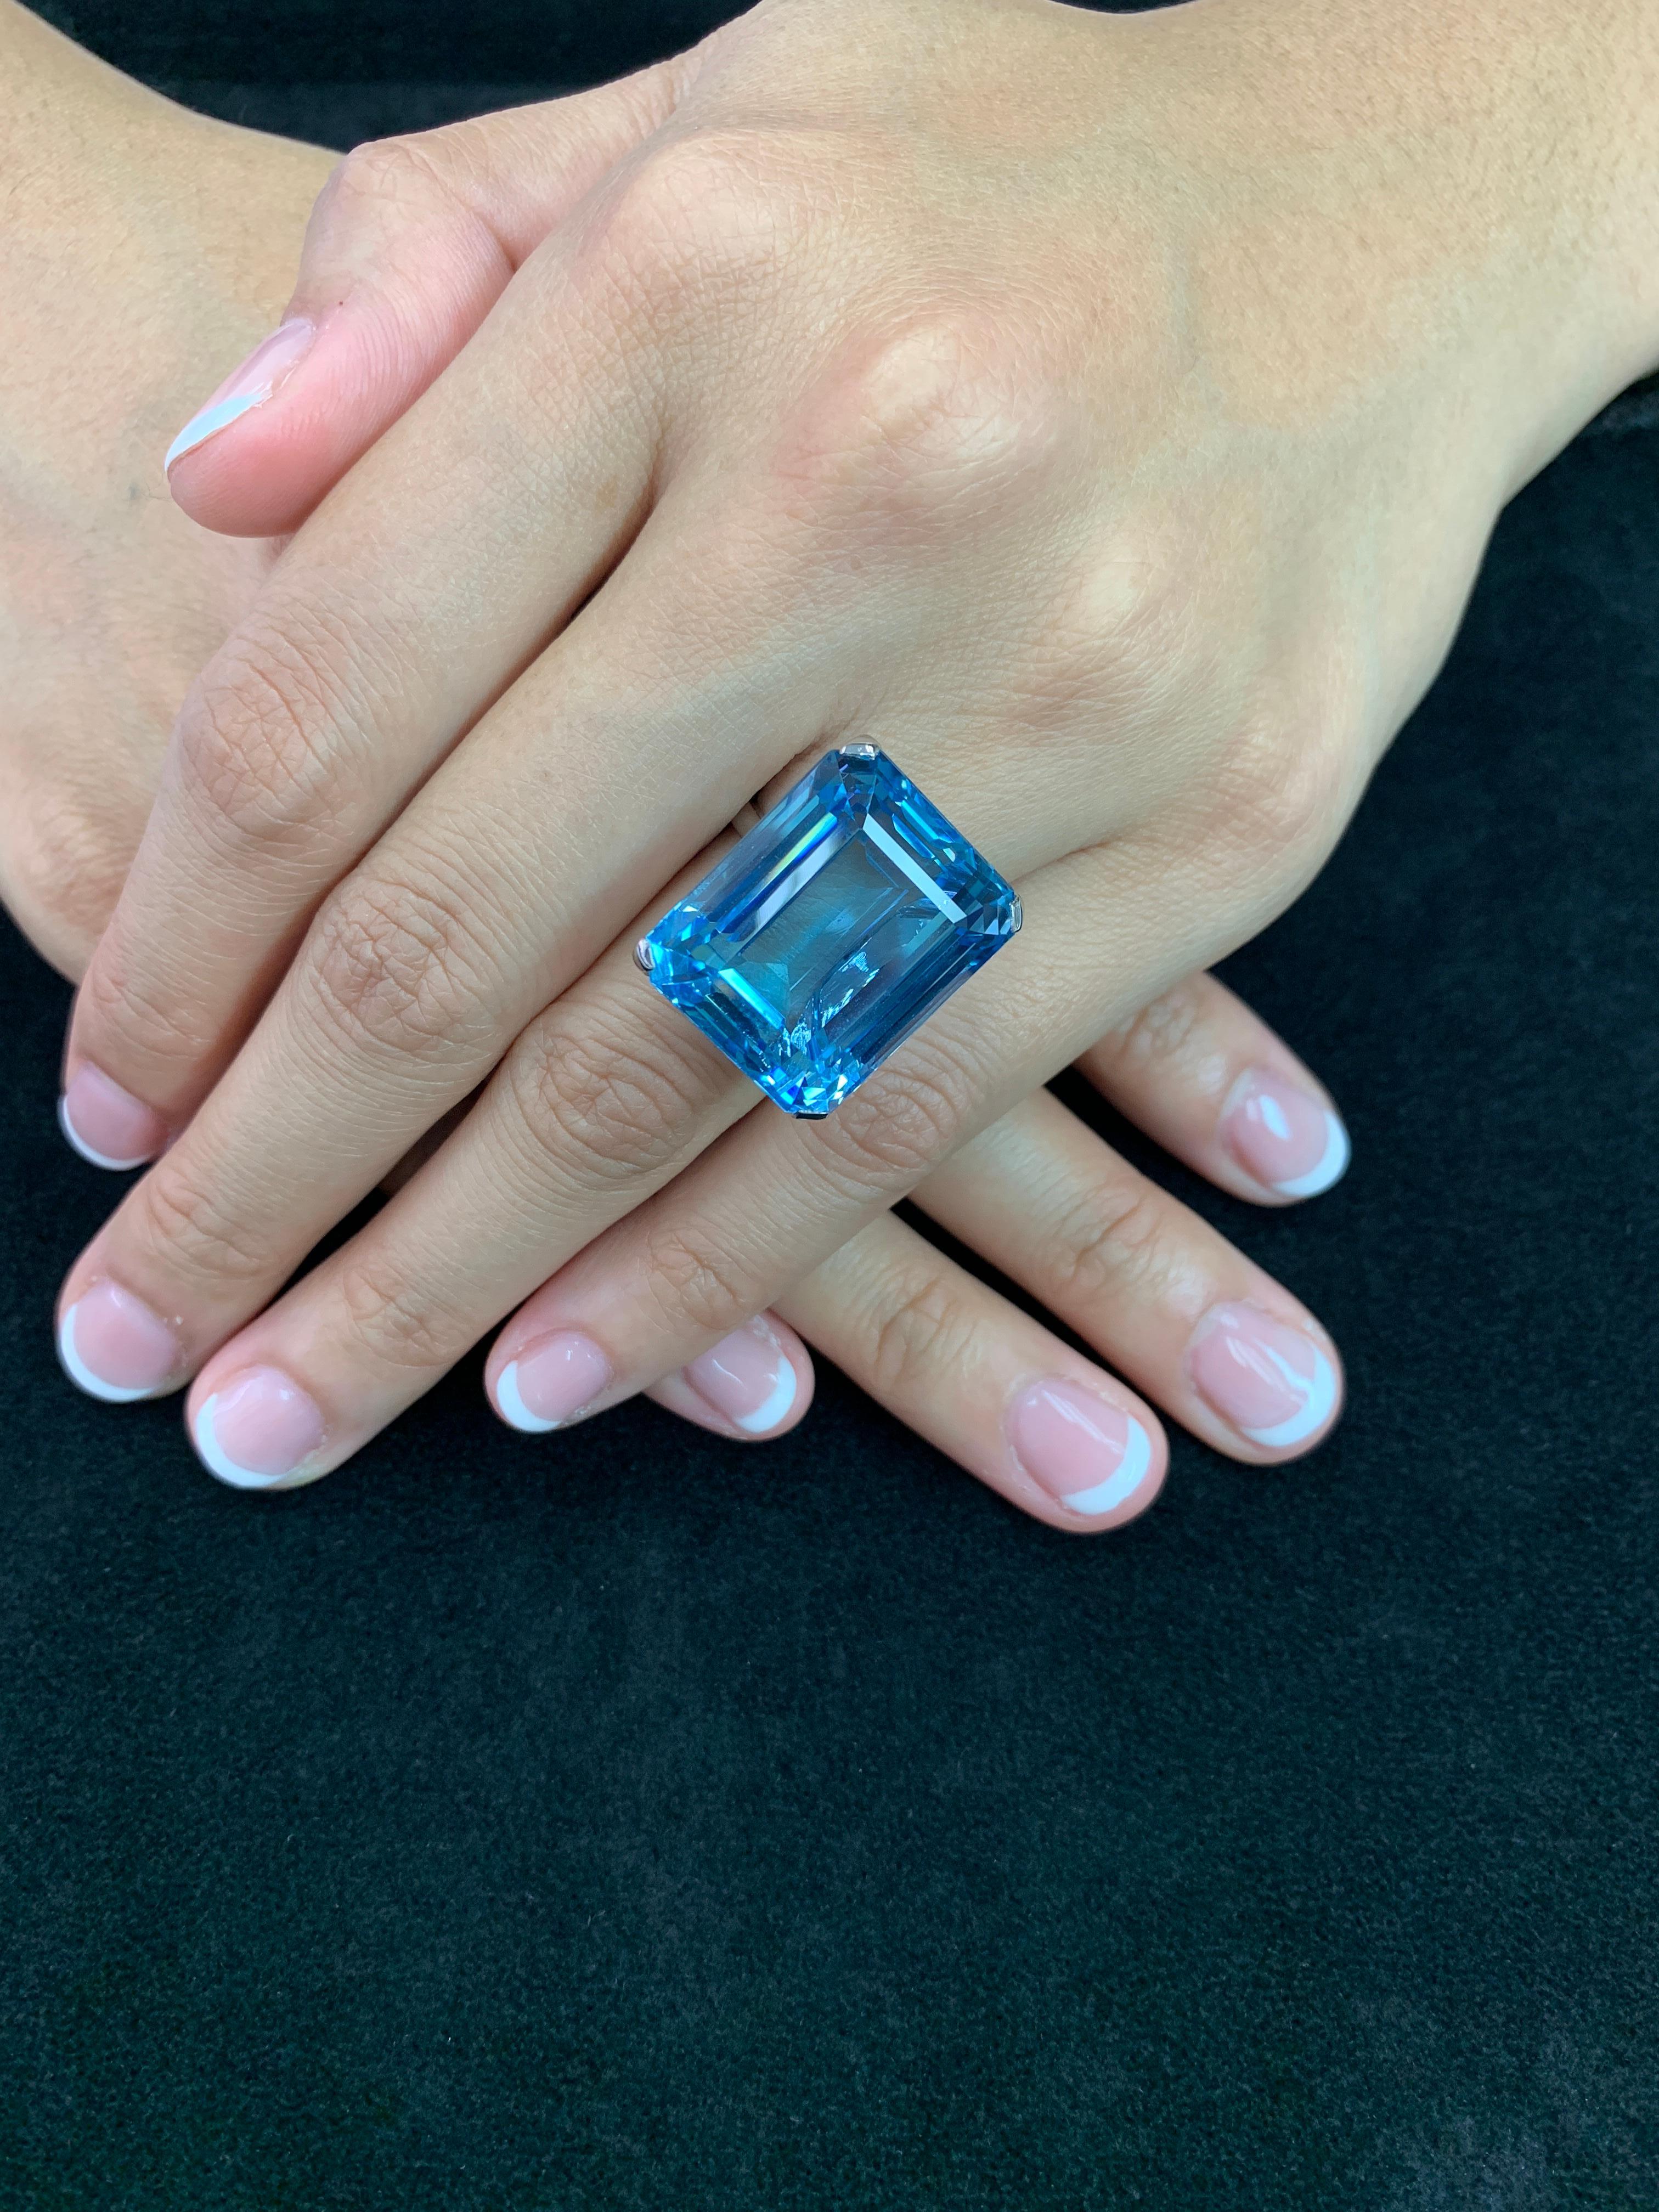 Here is a super nice platinum Aquamarine ring made by the famous Van Cleef & Arples. Circa 1950. The center Aquamarine of this VCA ring is a stunning 48.90 Cts. Not only is the size impressive, the color and clarity is exceptional. Look at the